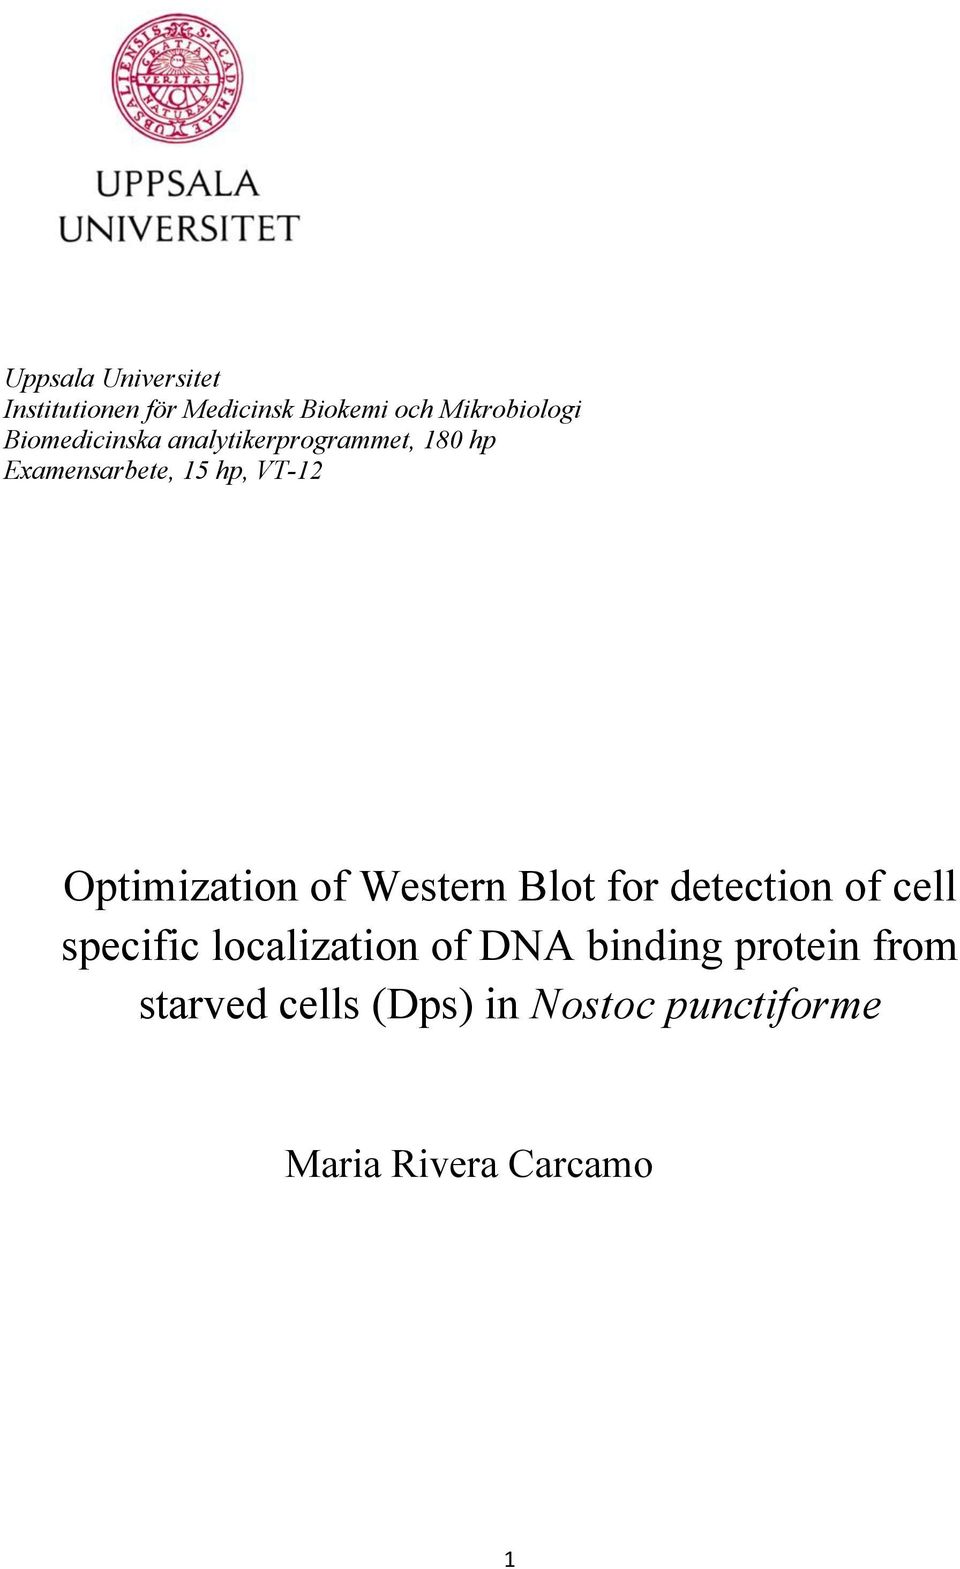 Optimization of Western Blot for detection of cell specific localization of